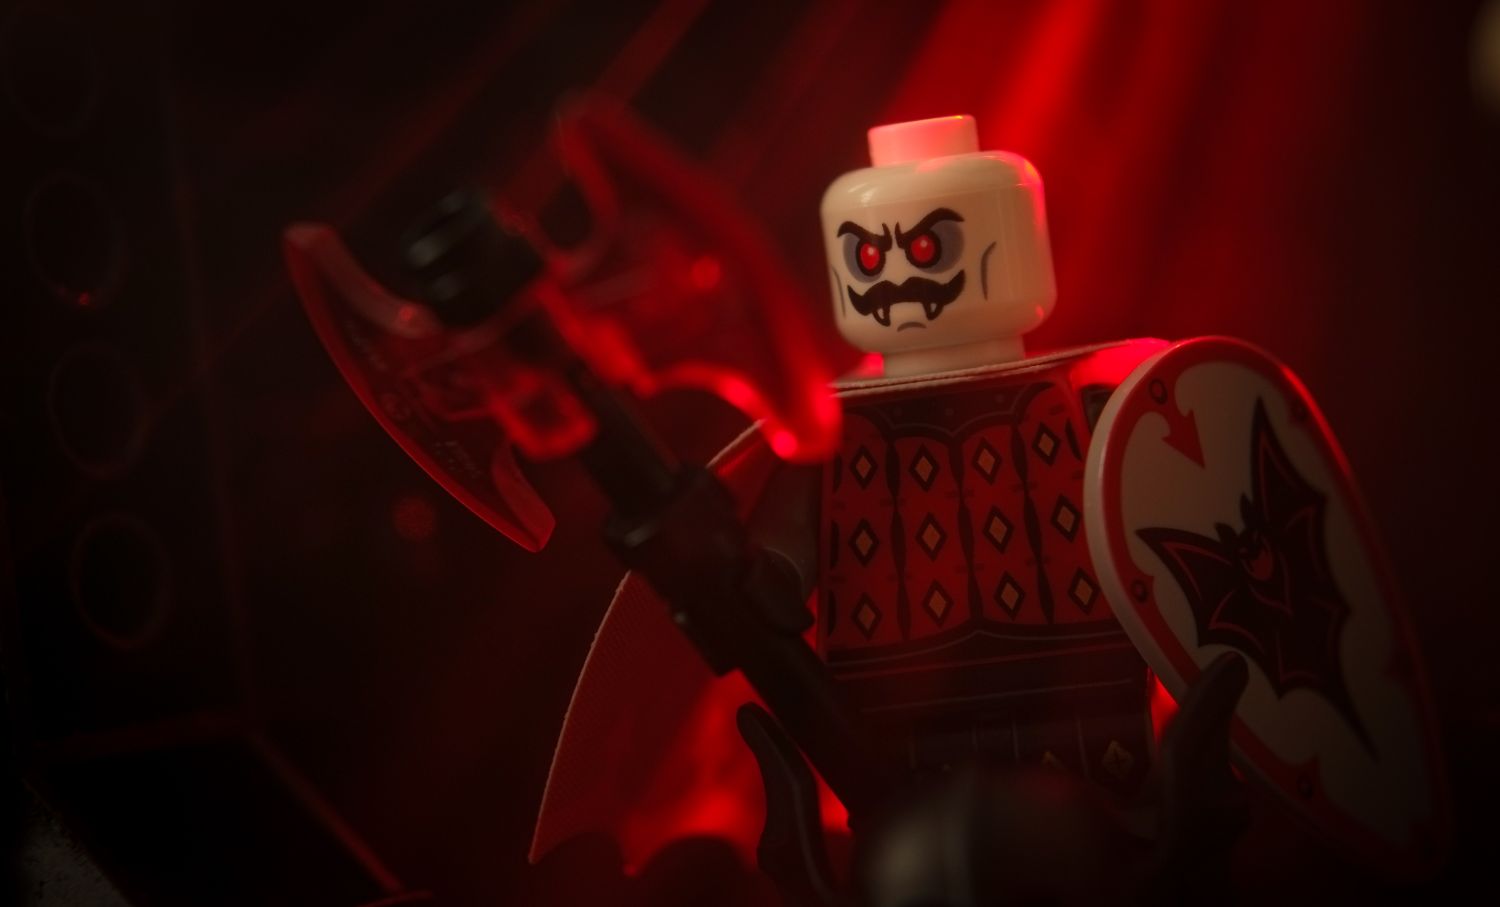 A LEGO Bat Lord minifigure holding a trans red axe.